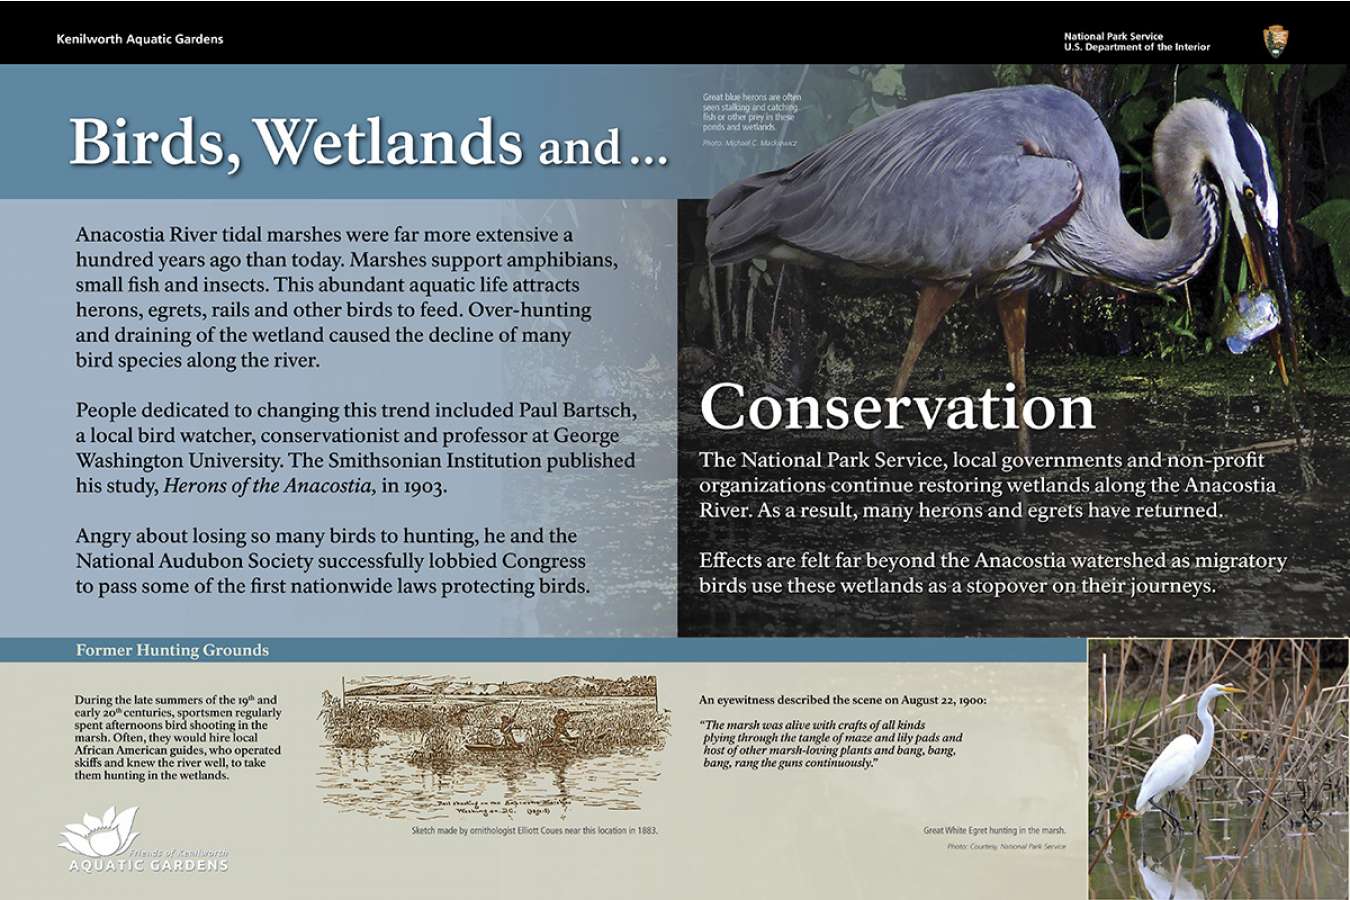 fokag 4 : Conservation is a big part of the Park's History including some of the first federal laws to protect birds.